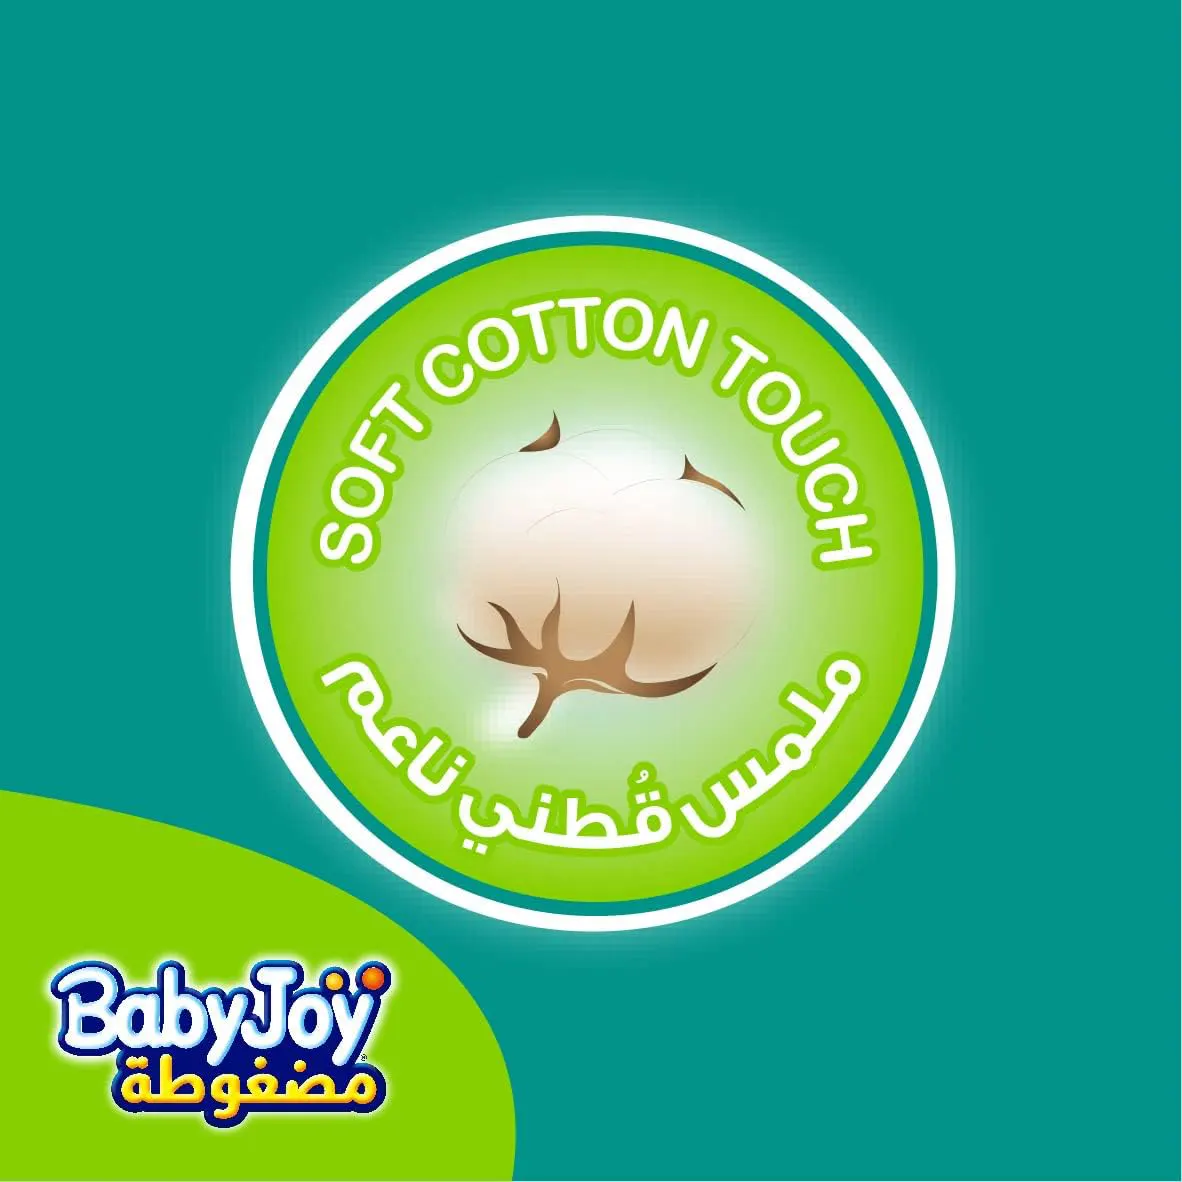 BabyJoy stretch diapers for babies, size 4, 10-18 kg, 58 diapers